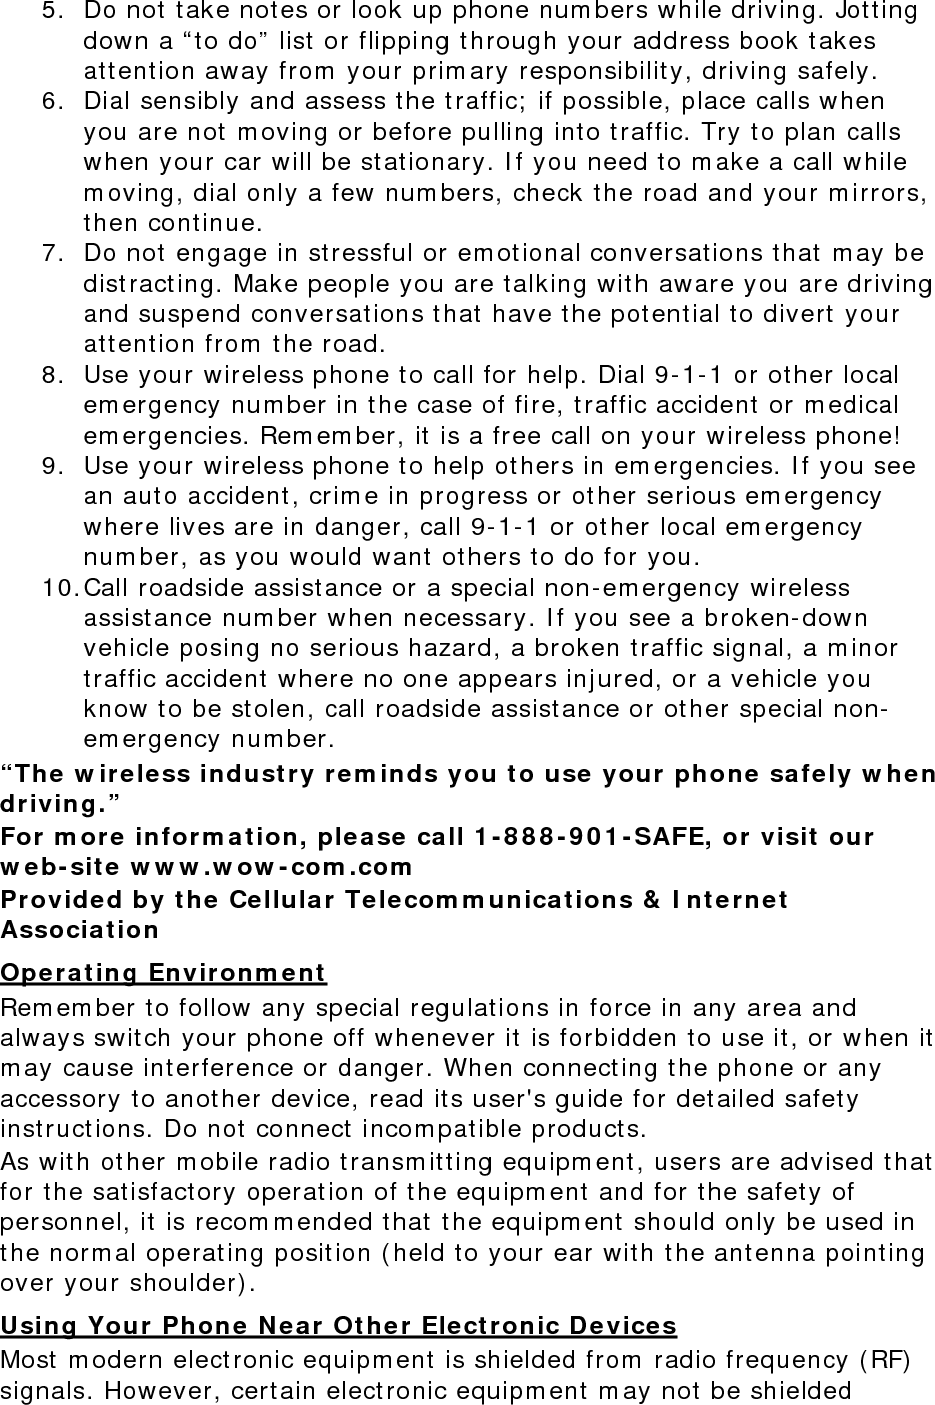 5. Do not take notes or look up phone numbers while driving. Jotting down a “to do” list or flipping through your address book takes attention away from your primary responsibility, driving safely. 6. Dial sensibly and assess the traffic; if possible, place calls when you are not moving or before pulling into traffic. Try to plan calls when your car will be stationary. If you need to make a call while moving, dial only a few numbers, check the road and your mirrors, then continue. 7. Do not engage in stressful or emotional conversations that may be distracting. Make people you are talking with aware you are driving and suspend conversations that have the potential to divert your attention from the road. 8. Use your wireless phone to call for help. Dial 9-1-1 or other local emergency number in the case of fire, traffic accident or medical emergencies. Remember, it is a free call on your wireless phone! 9. Use your wireless phone to help others in emergencies. If you see an auto accident, crime in progress or other serious emergency where lives are in danger, call 9-1-1 or other local emergency number, as you would want others to do for you. 10. Call roadside assistance or a special non-emergency wireless assistance number when necessary. If you see a broken-down vehicle posing no serious hazard, a broken traffic signal, a minor traffic accident where no one appears injured, or a vehicle you know to be stolen, call roadside assistance or other special non-emergency number. “The wireless industry reminds you to use your phone safely when driving.” For more information, please call 1-888-901-SAFE, or visit our web-site www.wow-com.com Provided by the Cellular Telecommunications &amp; Internet Association Operating Environment Remember to follow any special regulations in force in any area and always switch your phone off whenever it is forbidden to use it, or when it may cause interference or danger. When connecting the phone or any accessory to another device, read its user&apos;s guide for detailed safety instructions. Do not connect incompatible products. As with other mobile radio transmitting equipment, users are advised that for the satisfactory operation of the equipment and for the safety of personnel, it is recommended that the equipment should only be used in the normal operating position (held to your ear with the antenna pointing over your shoulder). Using Your Phone Near Other Electronic Devices Most modern electronic equipment is shielded from radio frequency (RF) signals. However, certain electronic equipment may not be shielded 